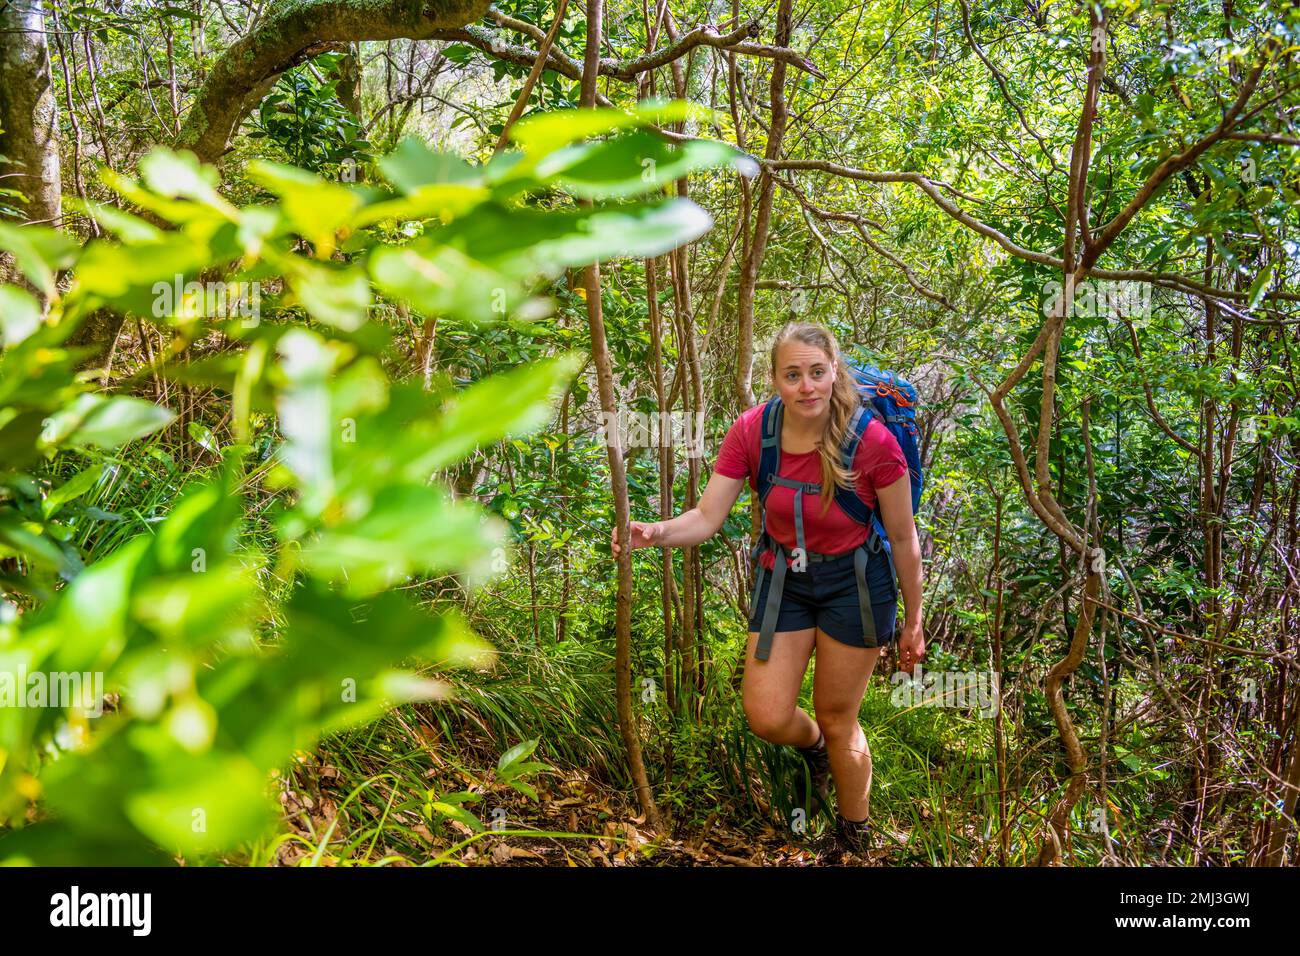 Adventure, Hiker in the dense forest Boaventura, Madeira, Portugal Stock Photo